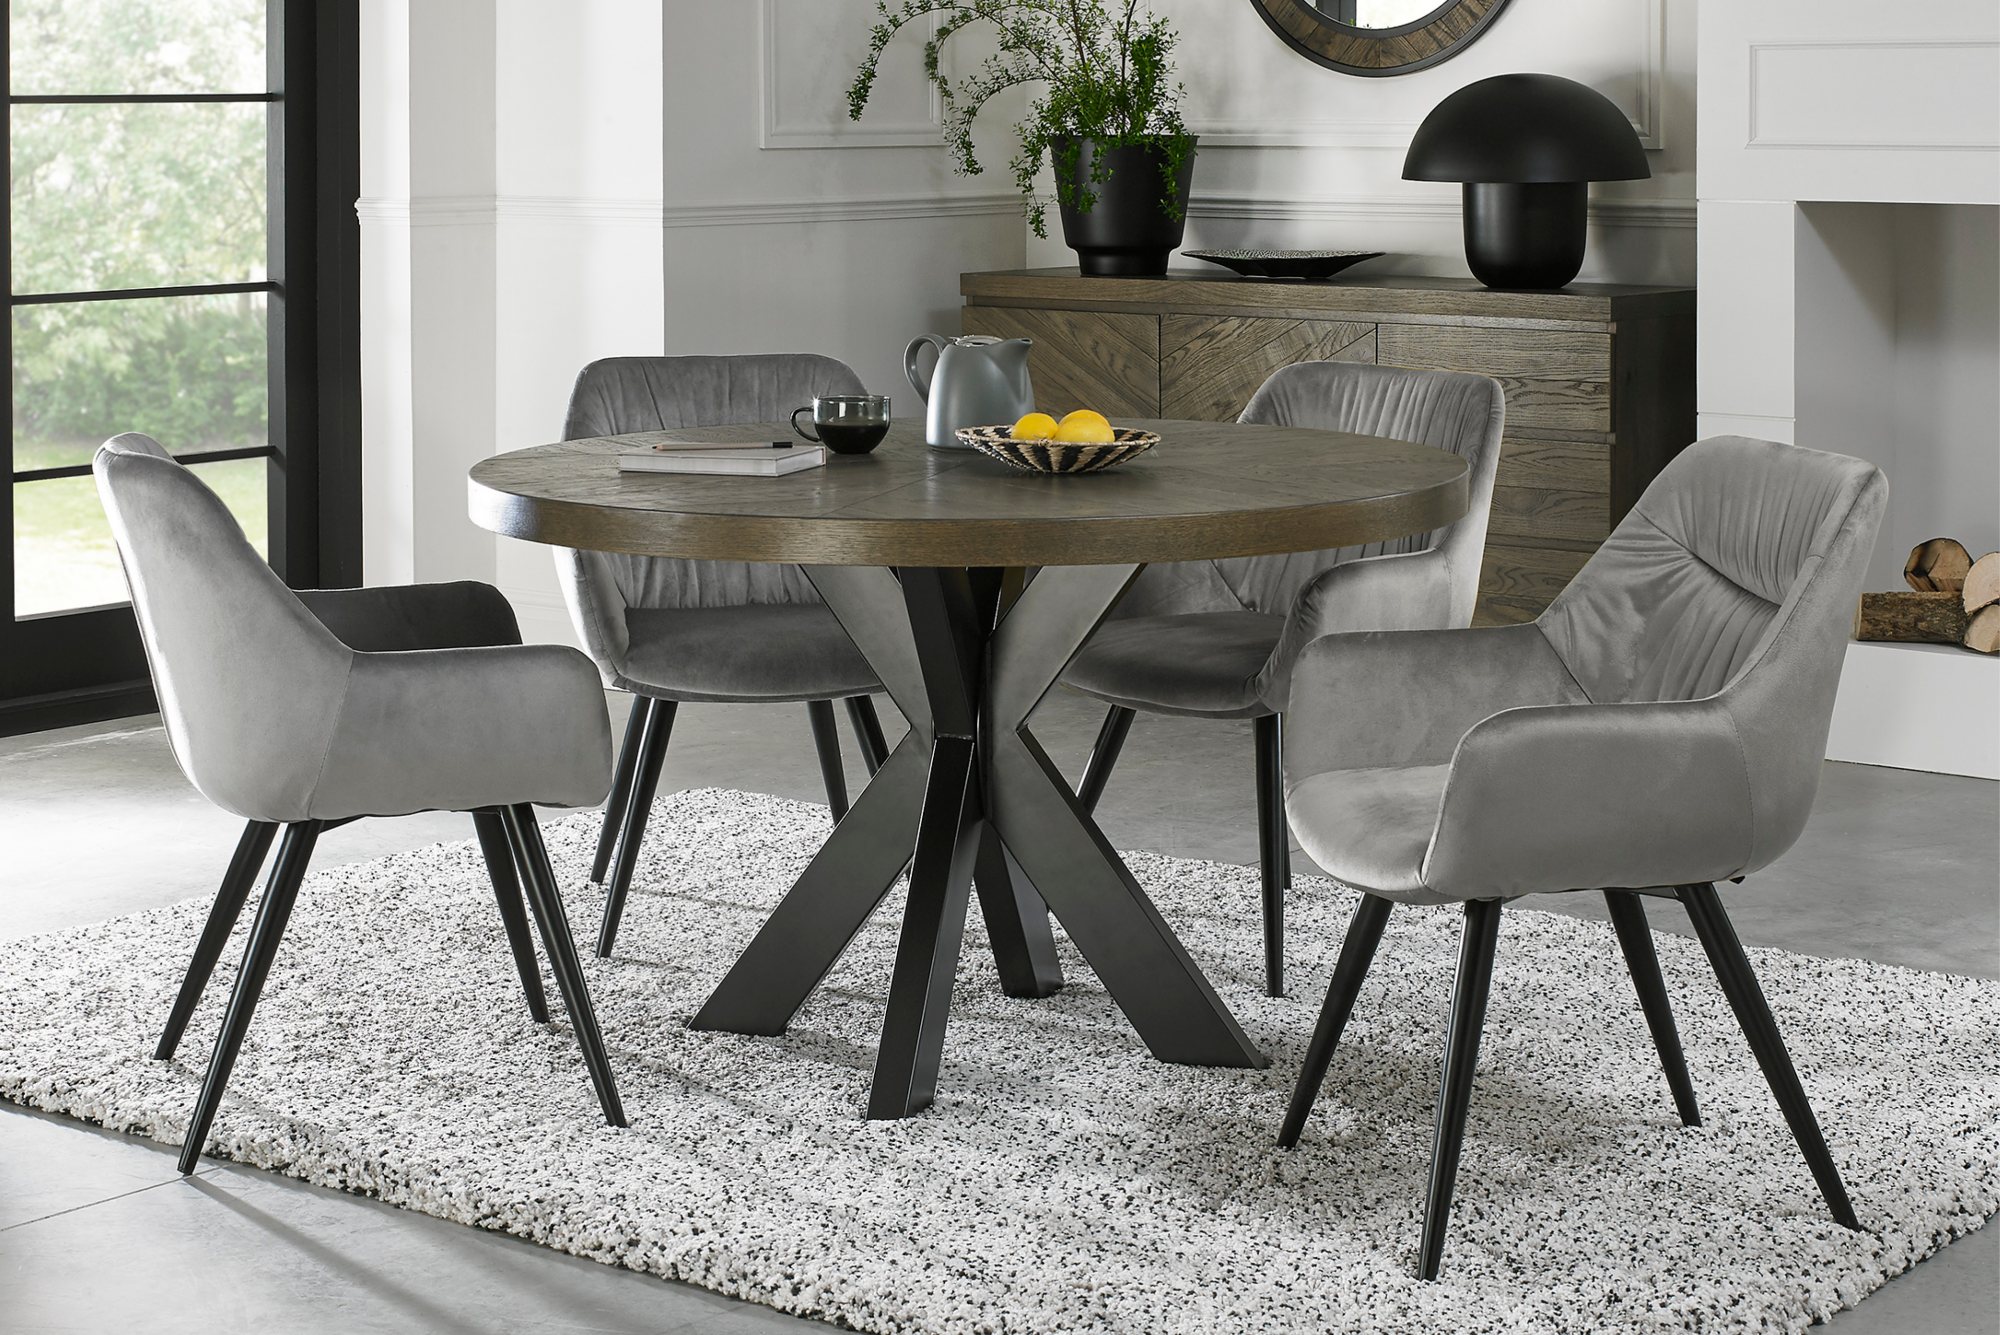 Home Origins Bosco fumed oak 4 seater dining table with 4 Dali chairs- grey velvet fabric